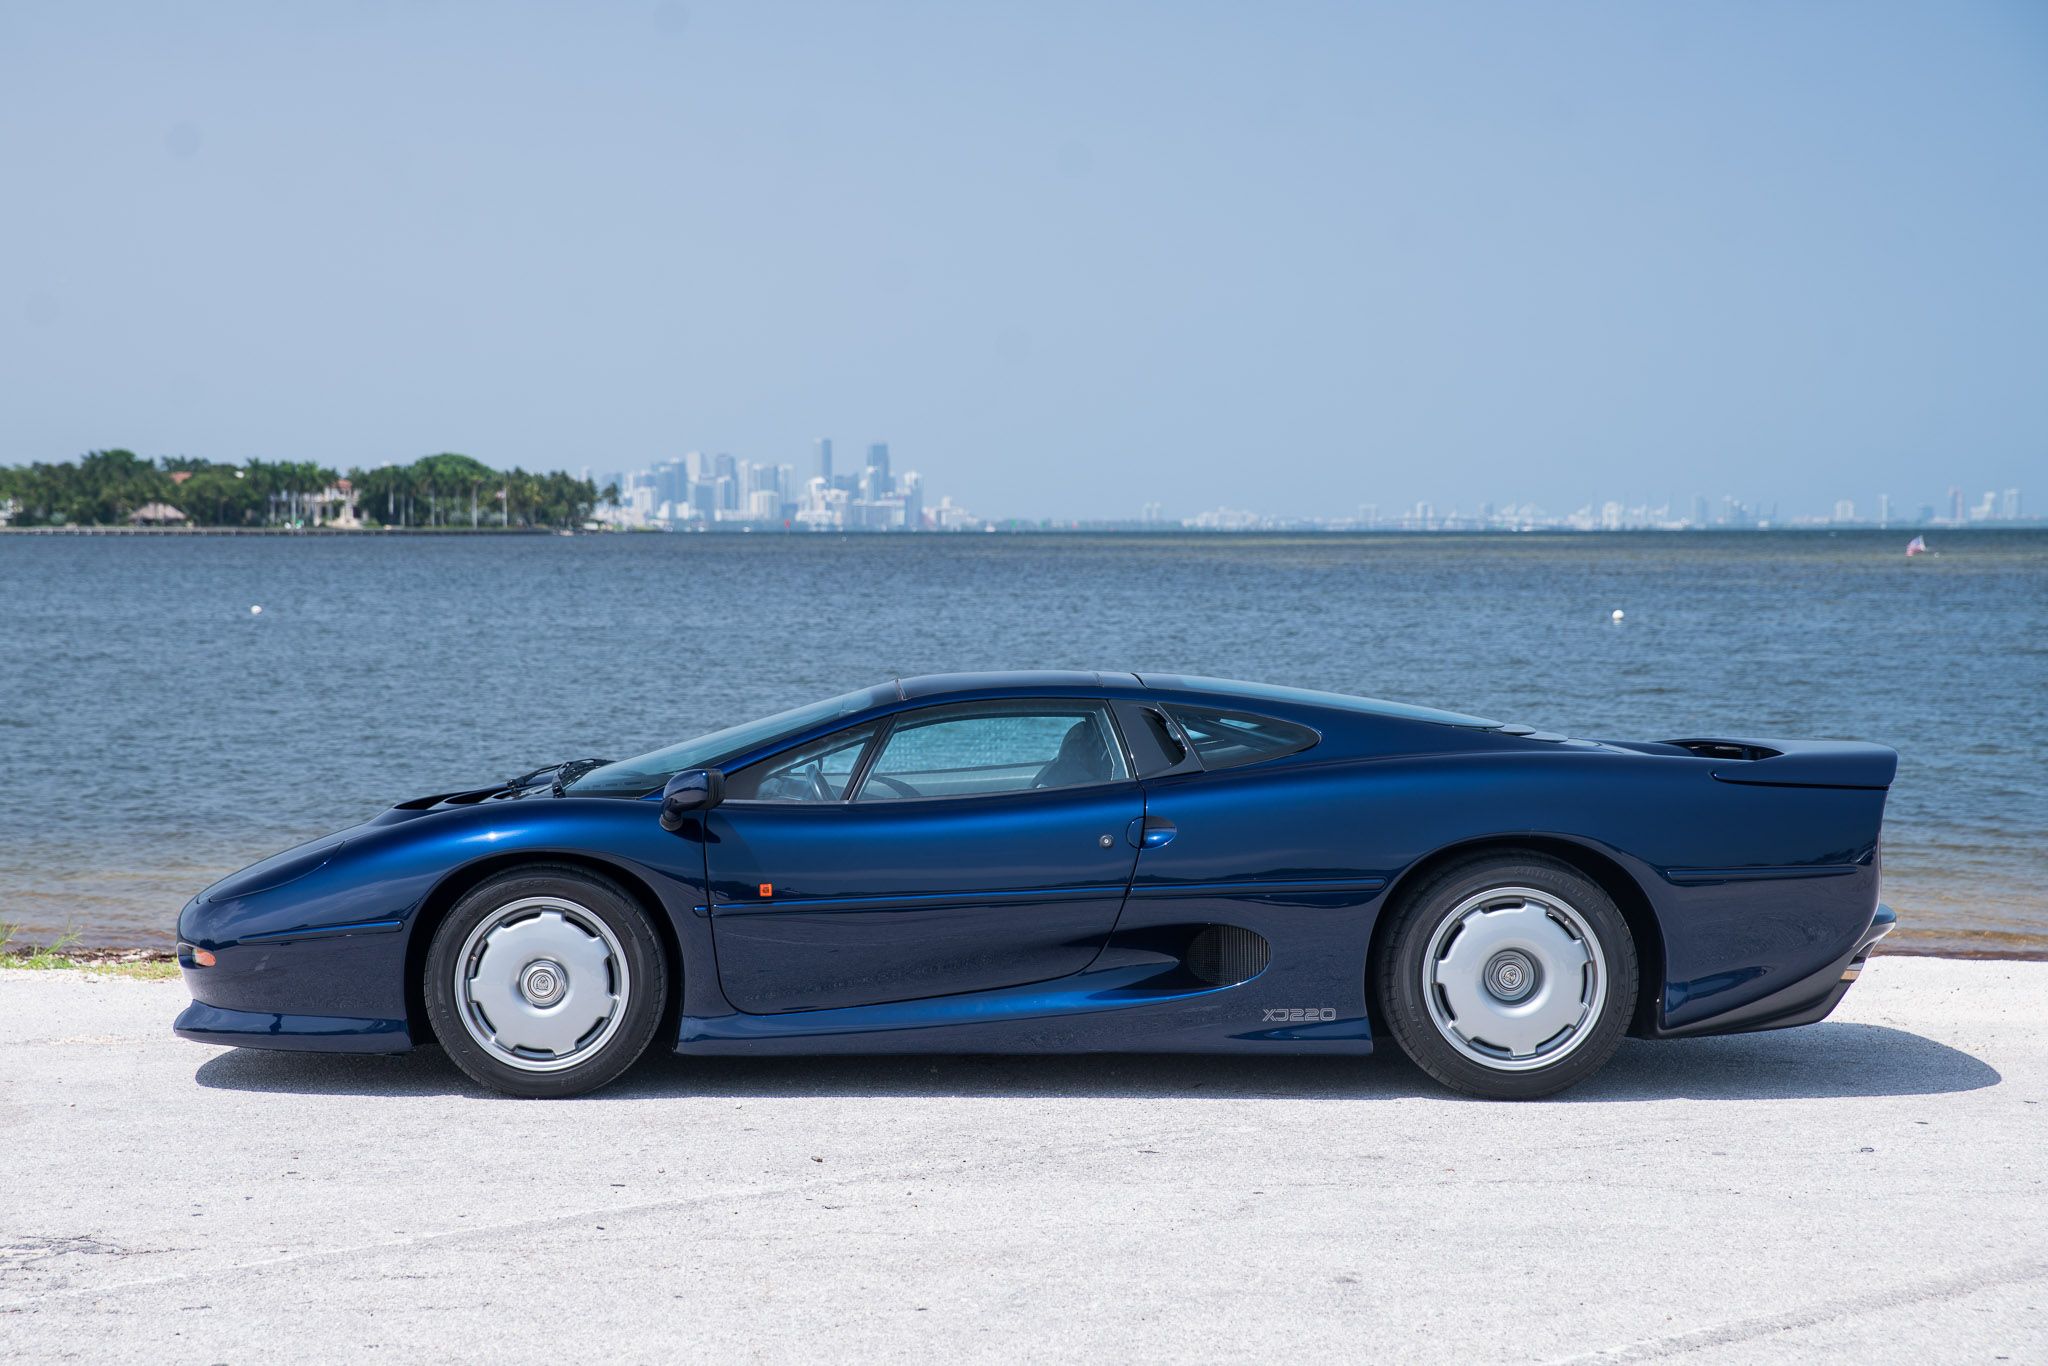 1994 Jaguar XJ220: Sports car that once stood as the fastest production car on the roads.